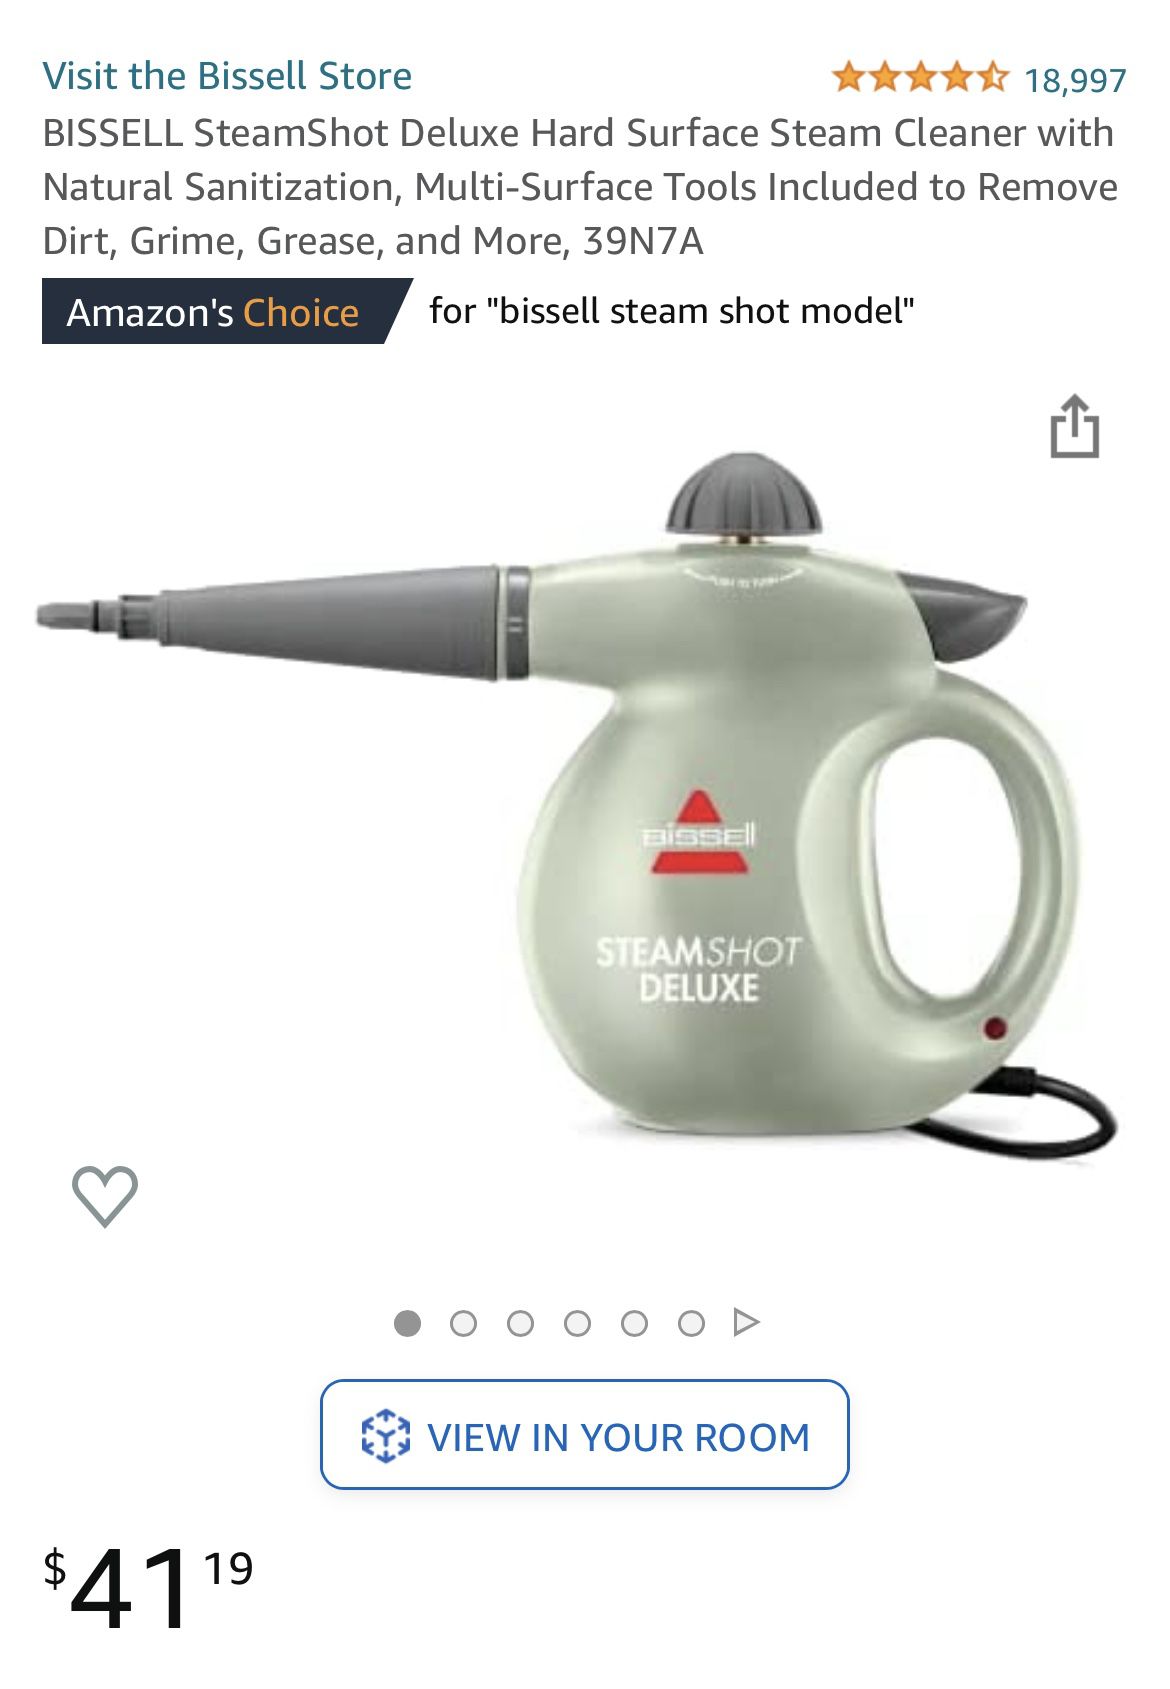 BISSELL SteamShot Deluxe Hard Surface Steam Cleaner 